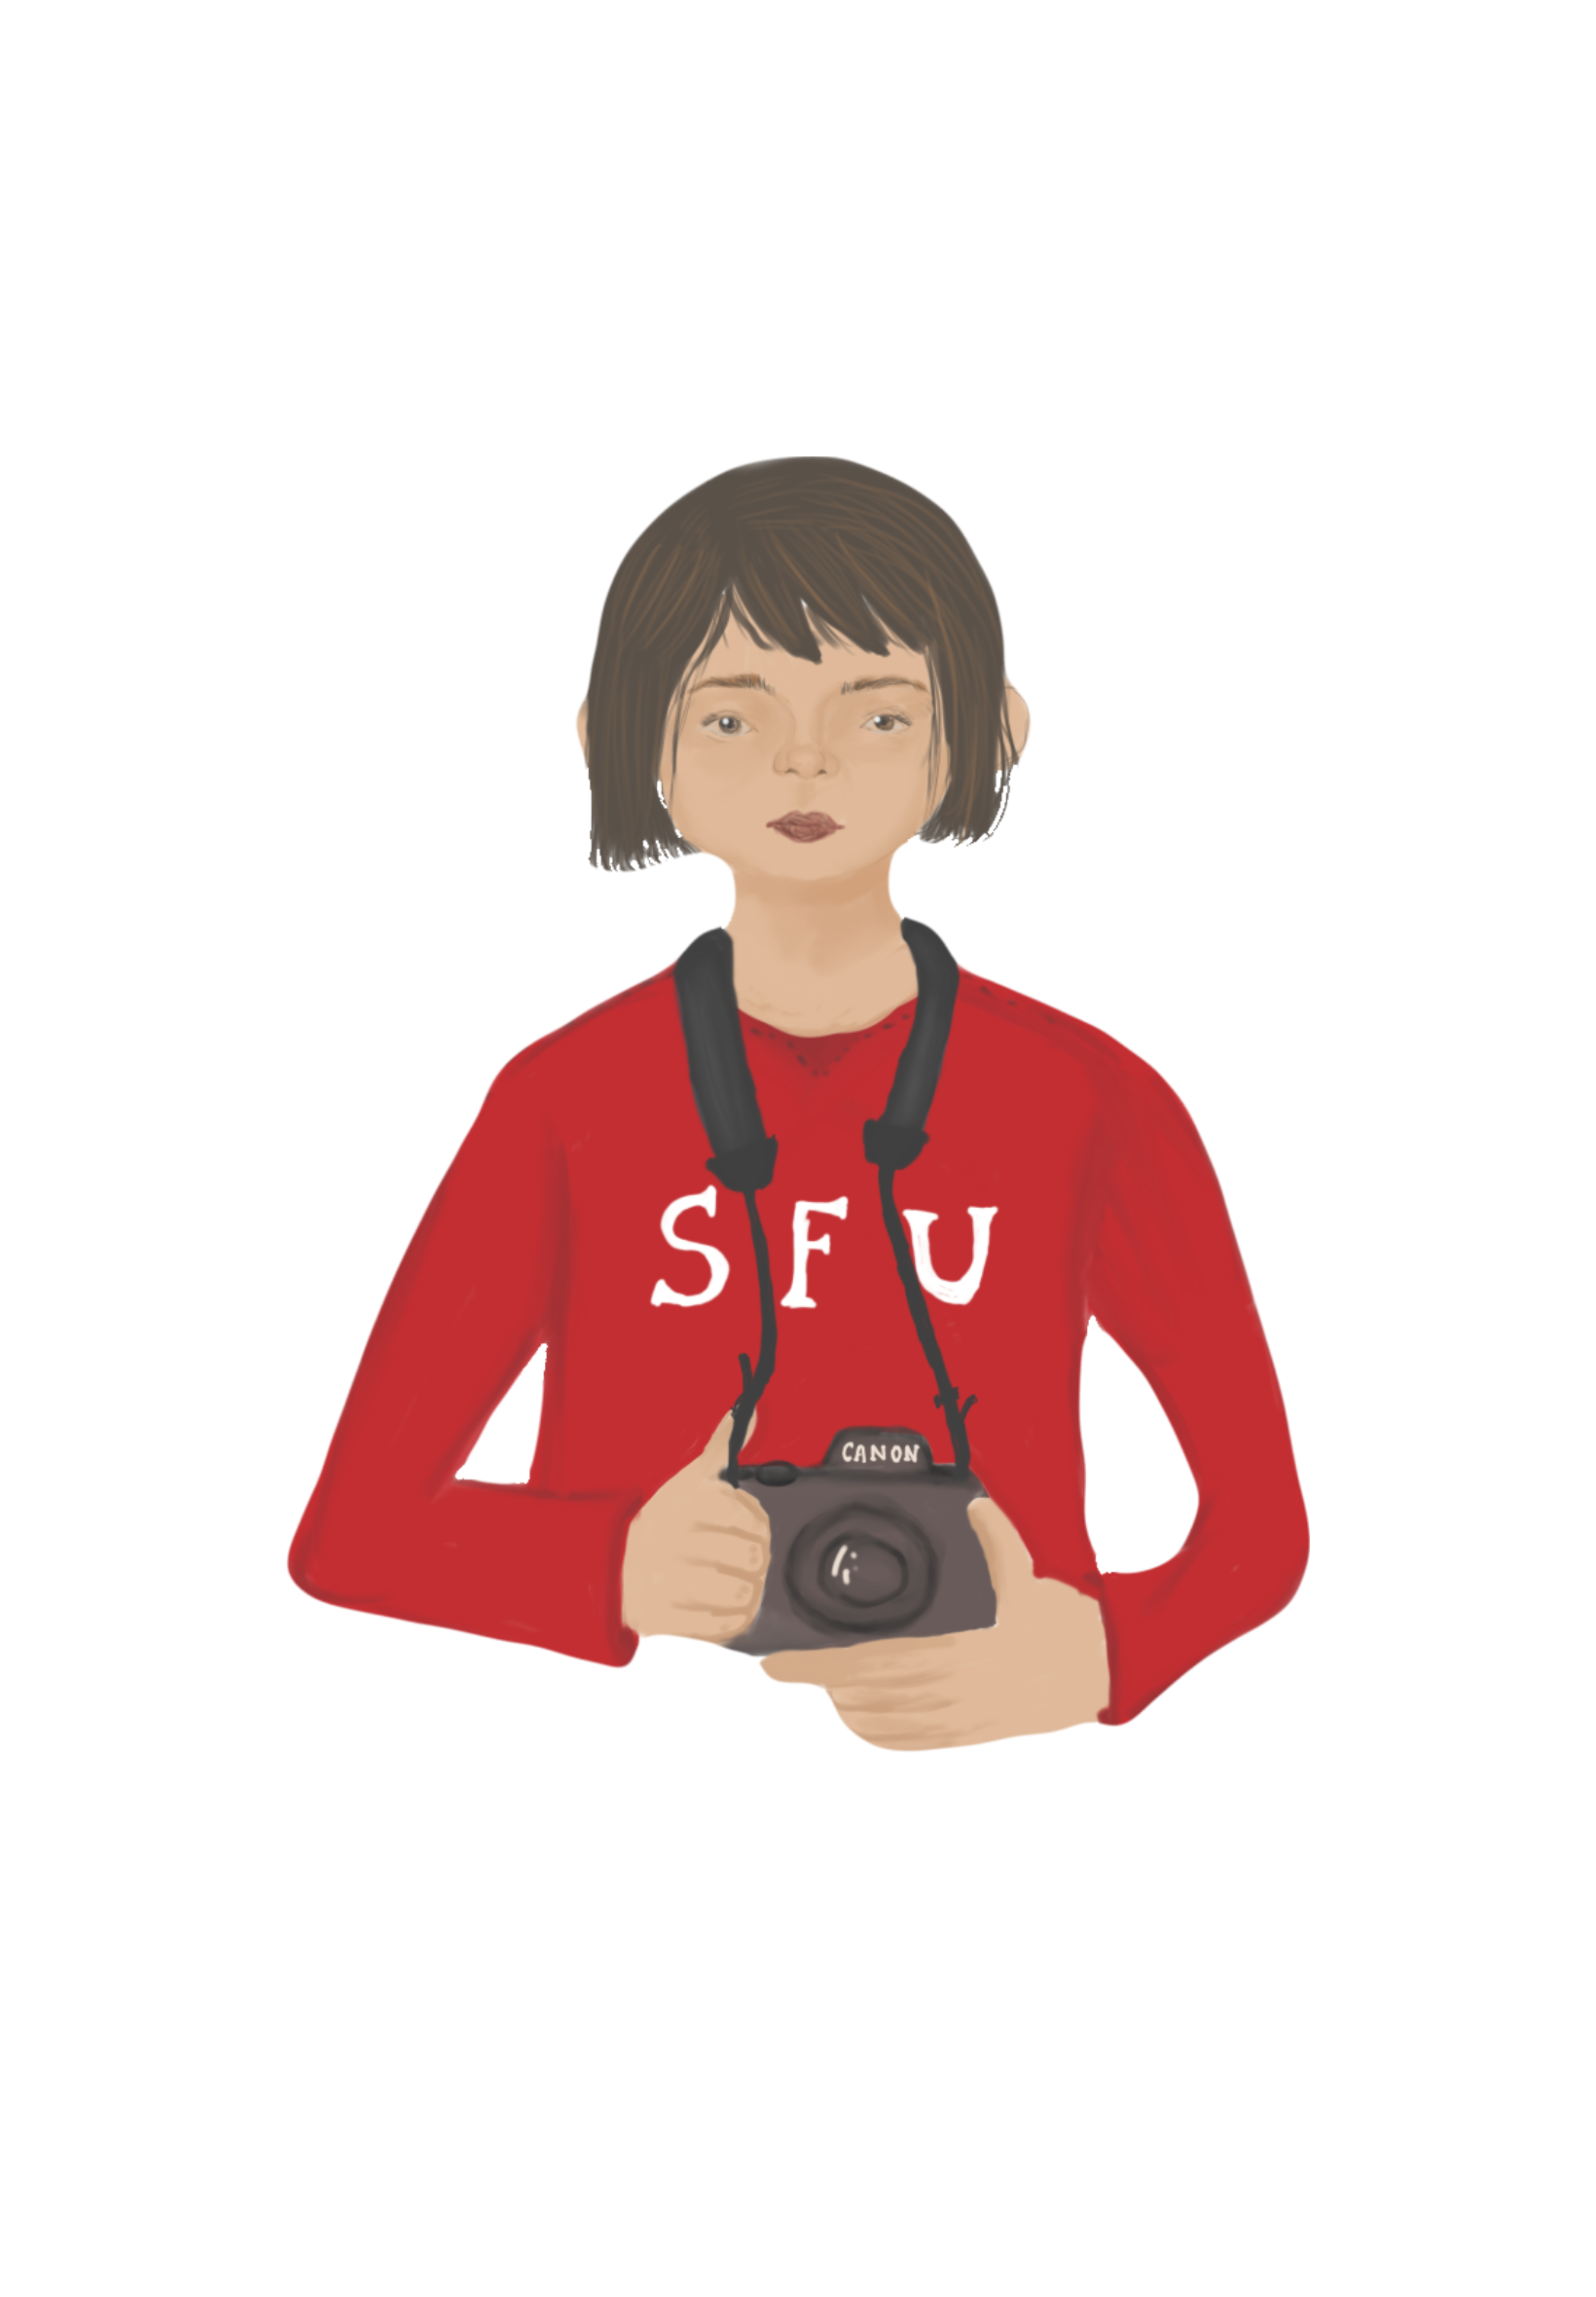 An illustration of a person in a red long sleeve SFU shirt holding a canon camera.